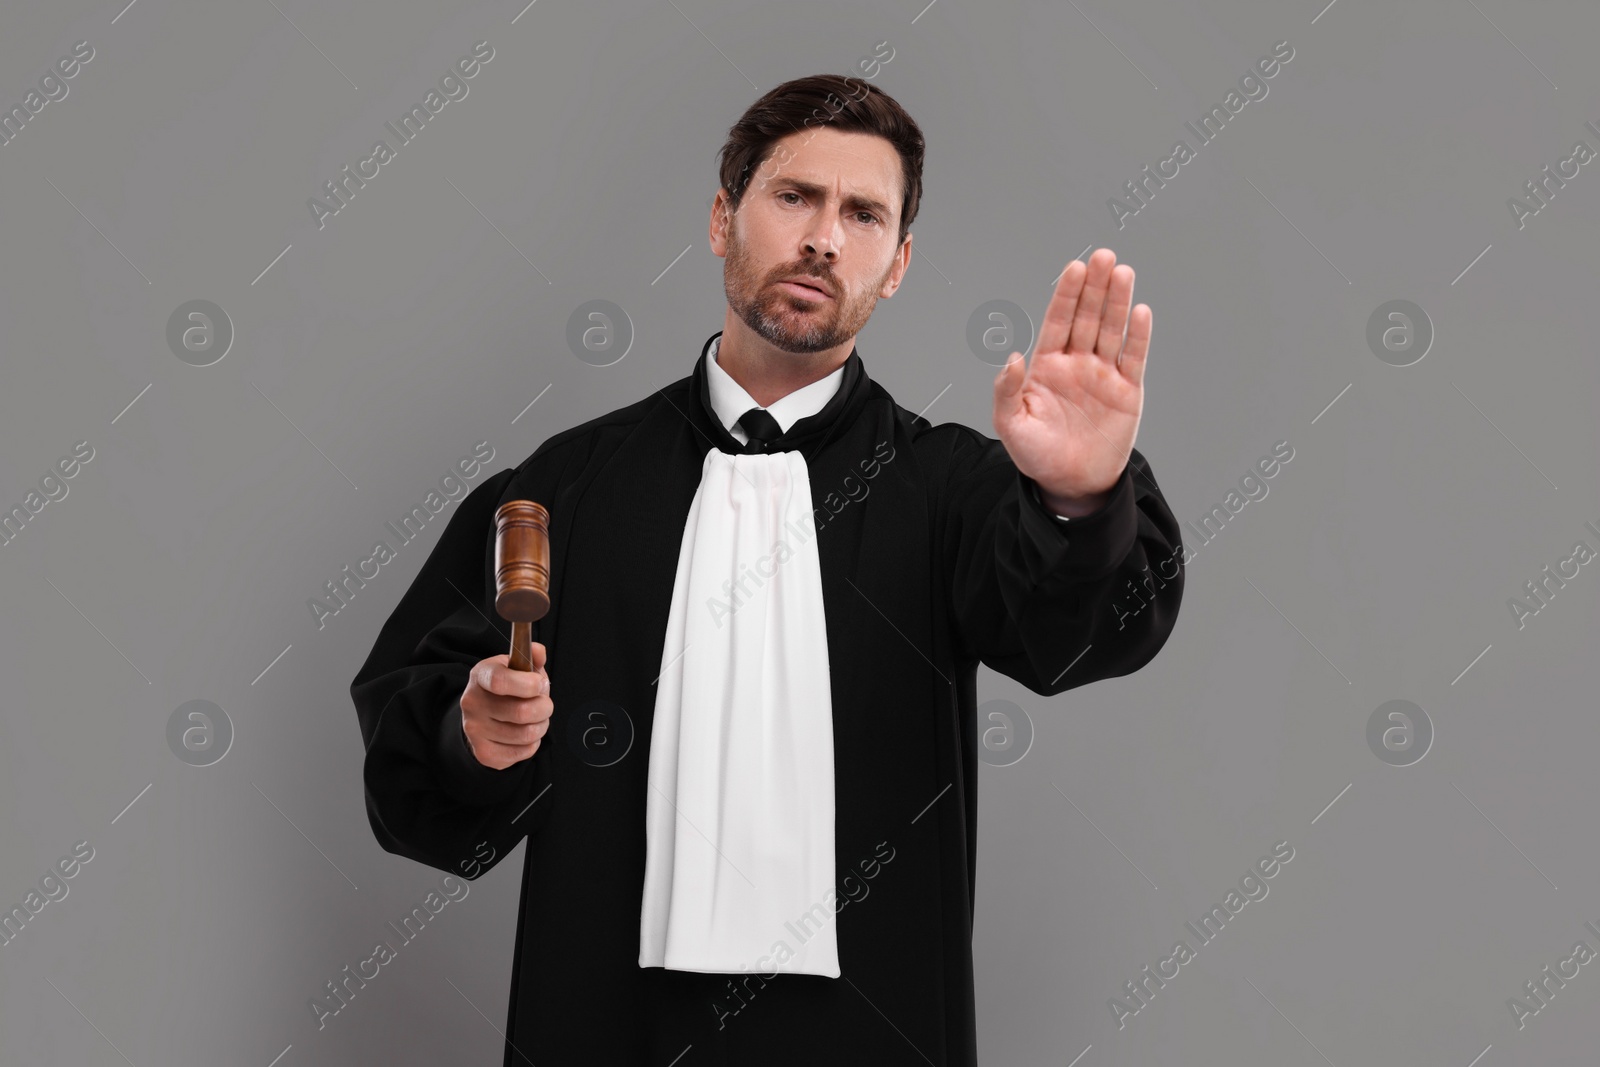 Photo of Judge with gavel gesturing on grey background